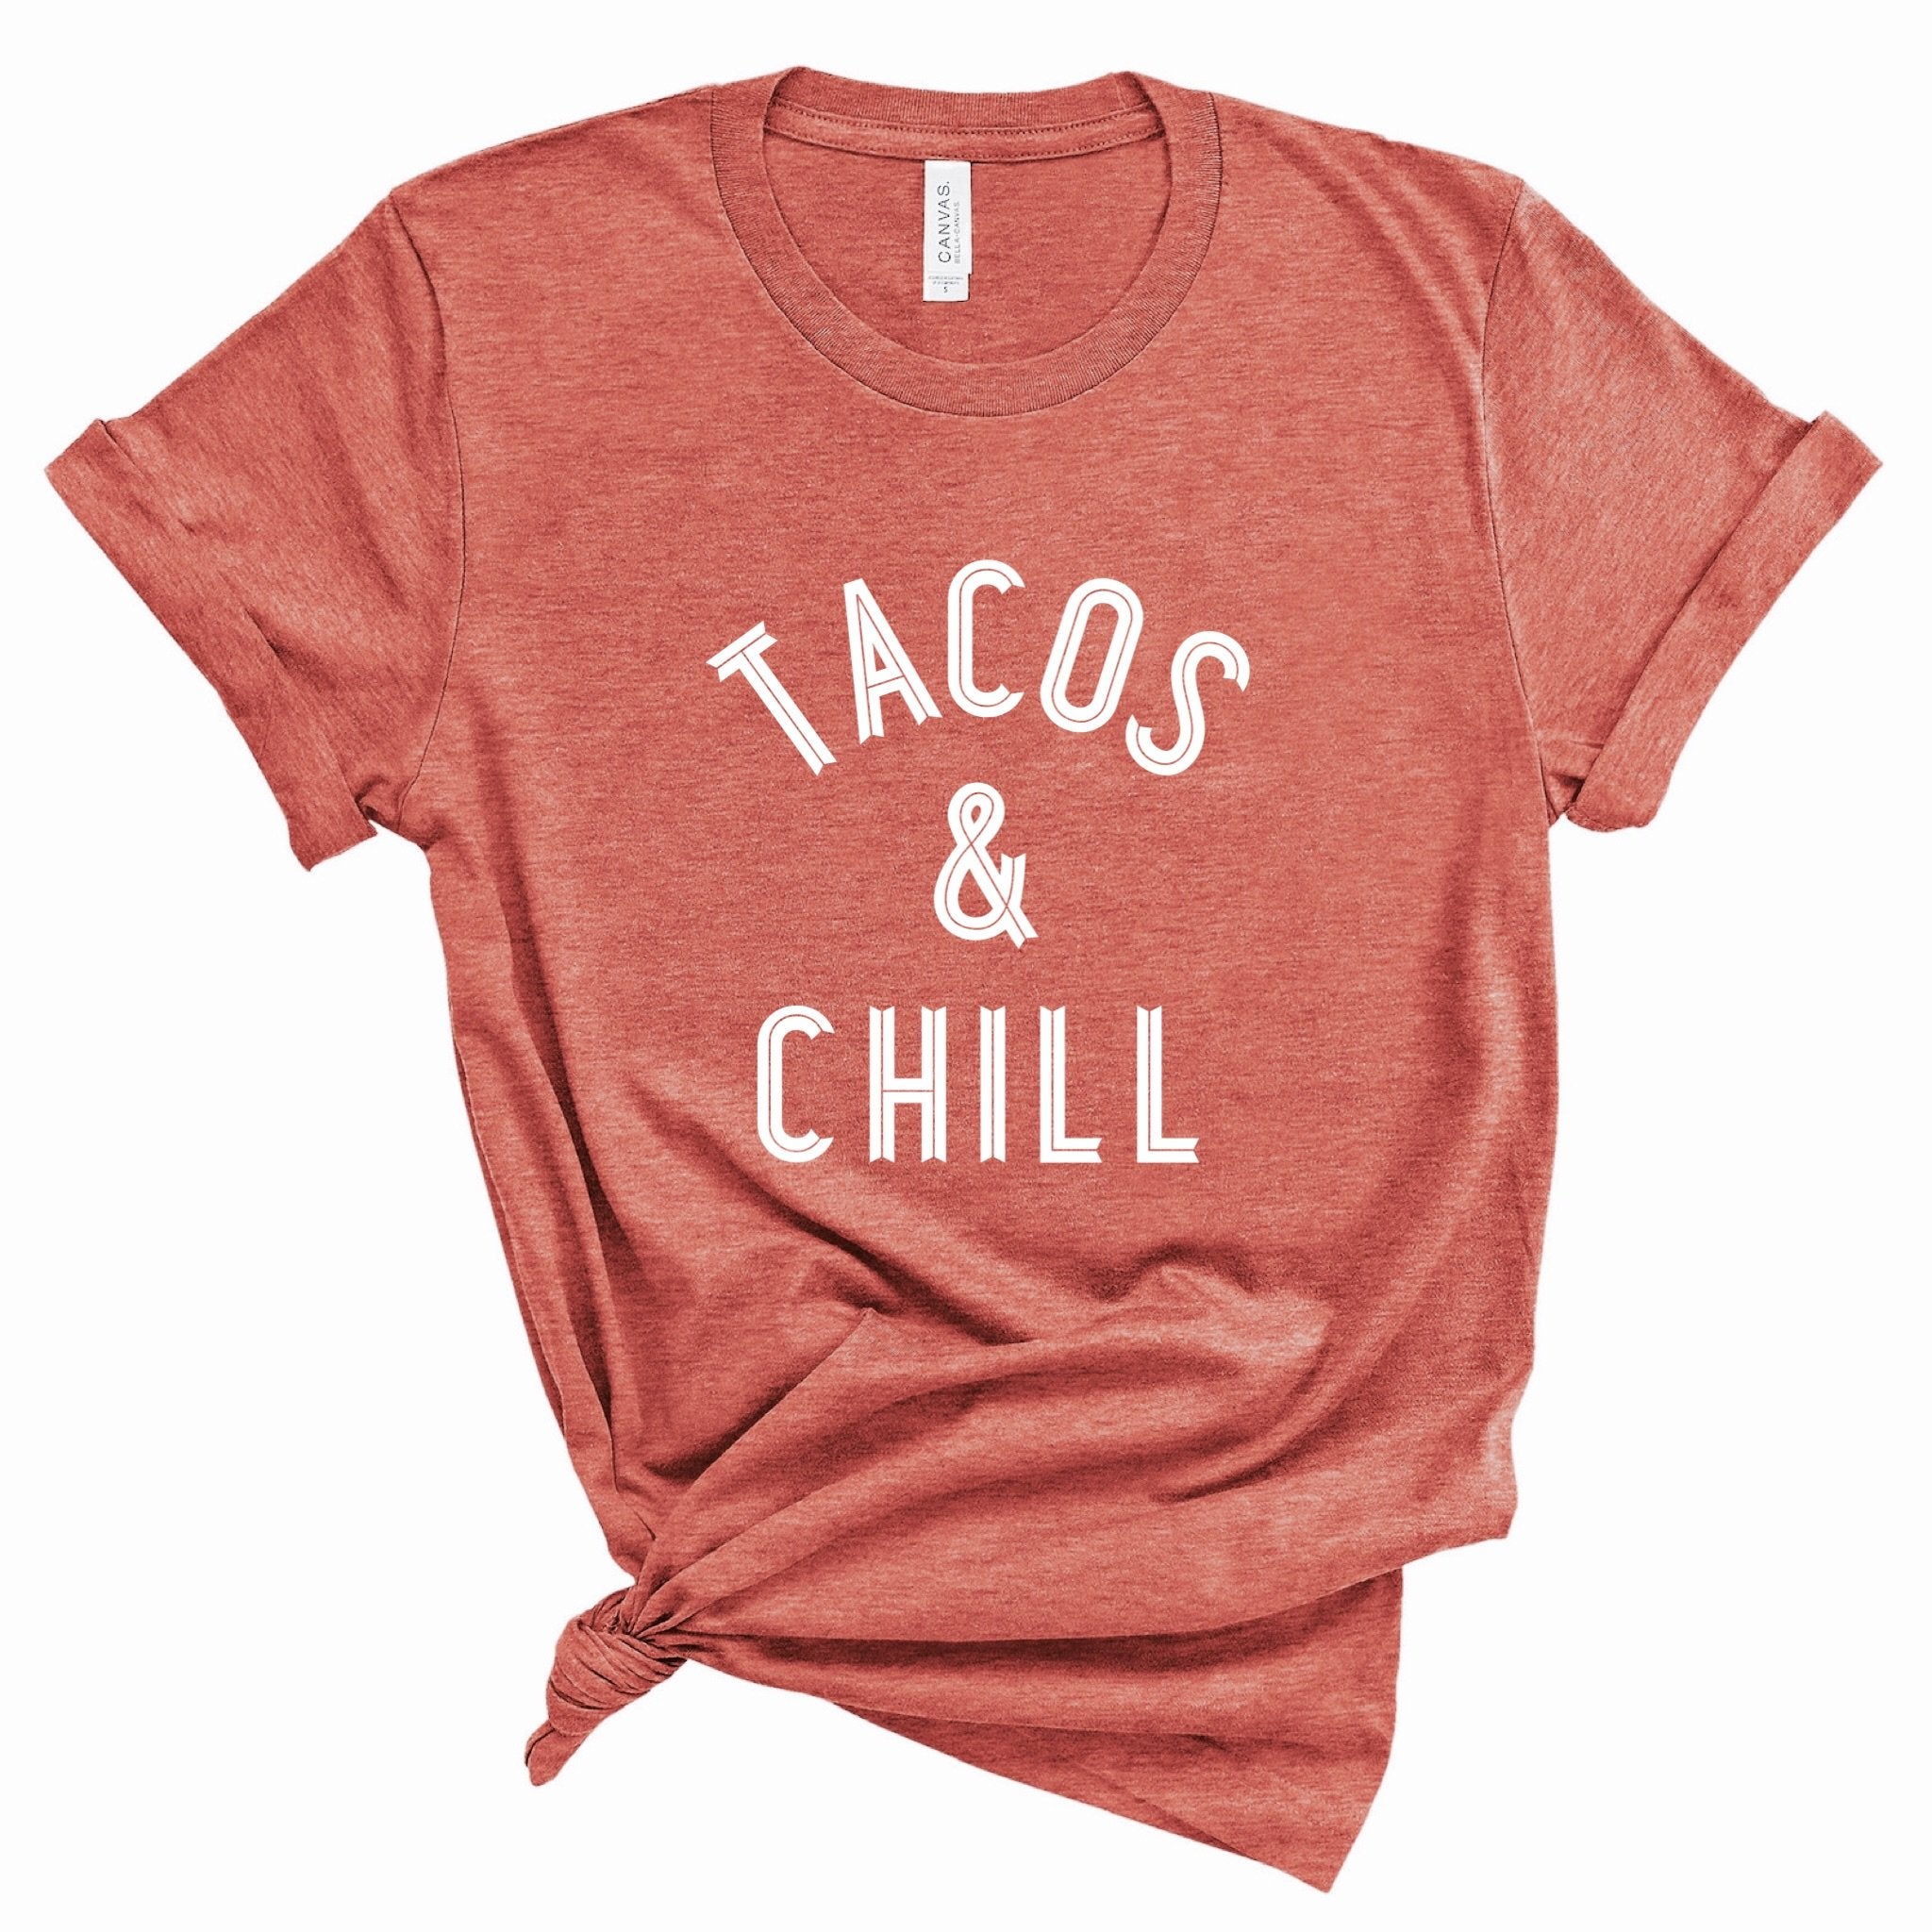 Tacos & Chill Graphic Tee